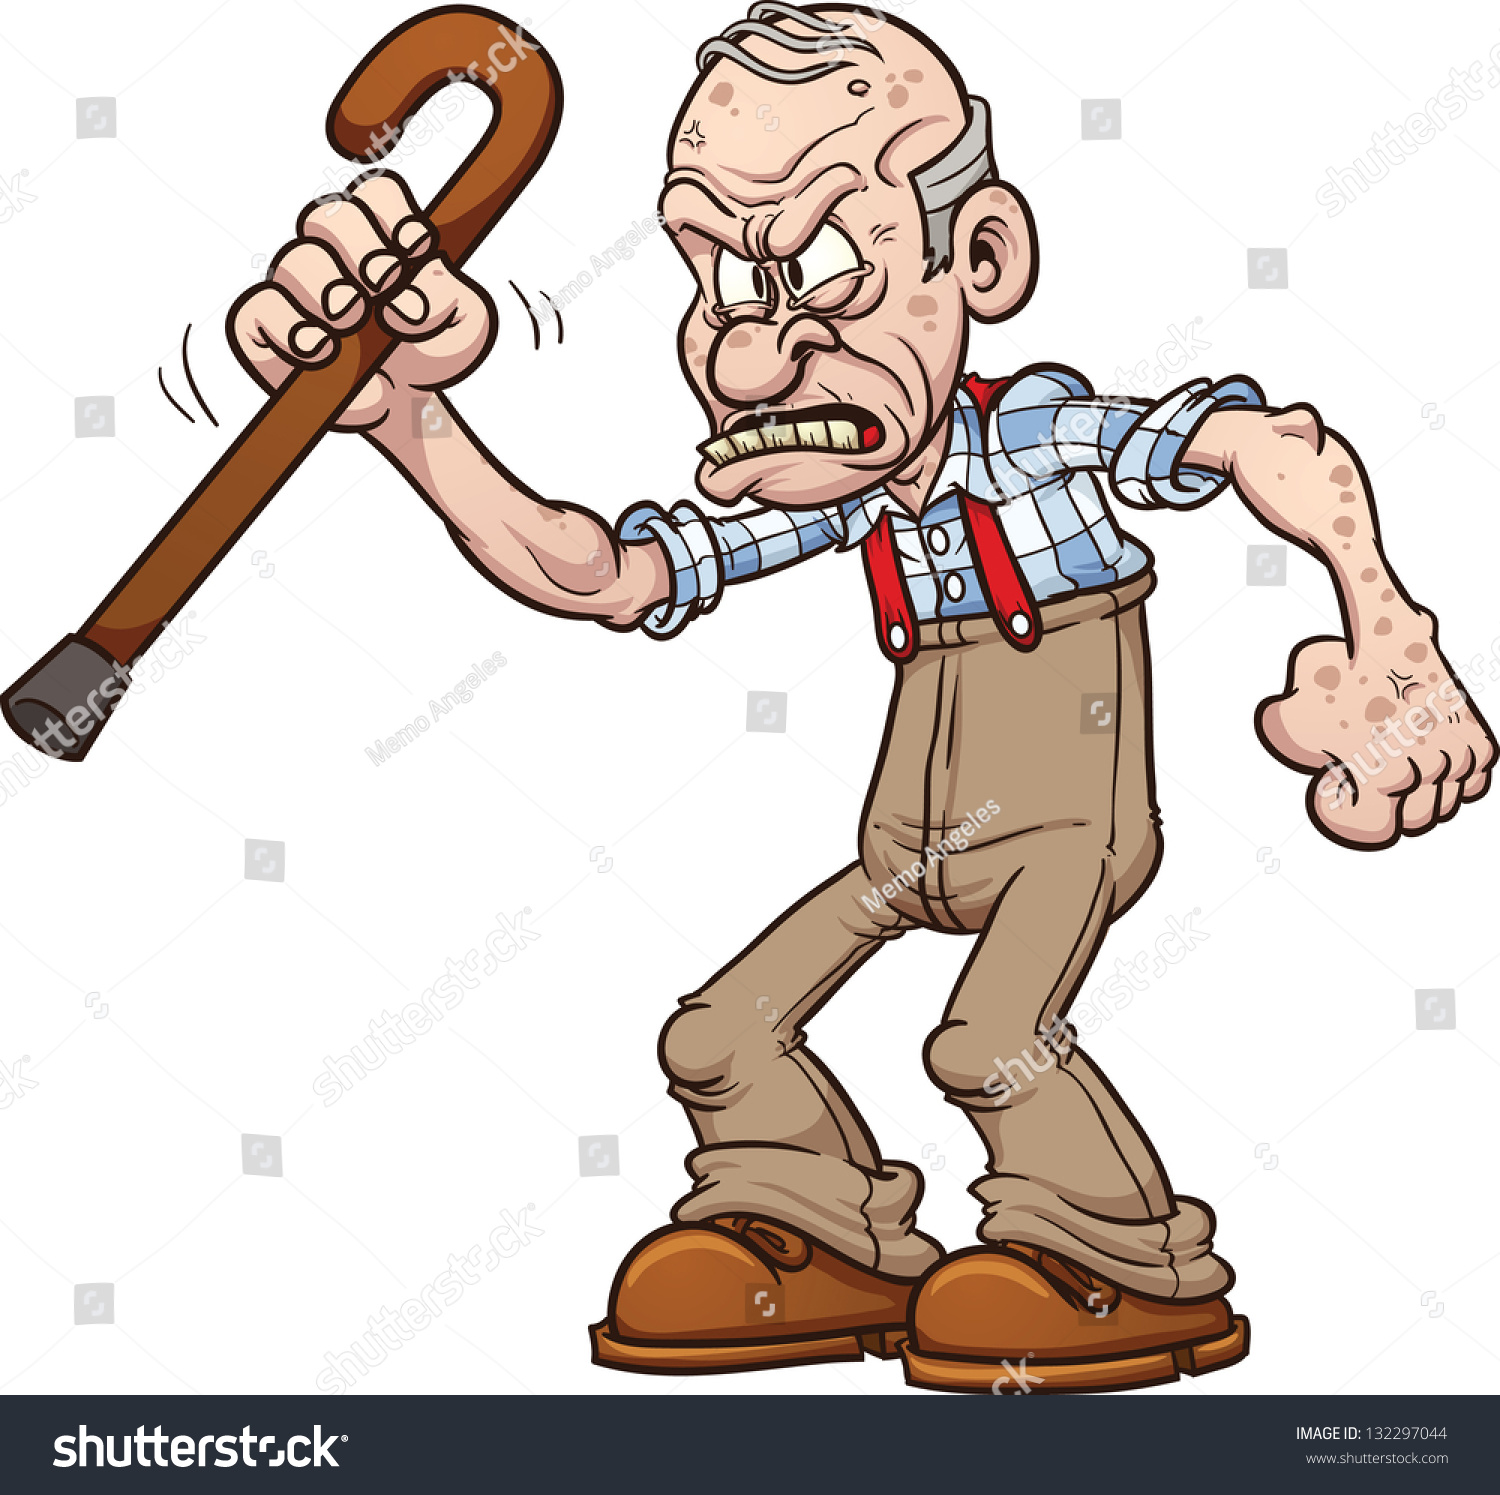 clipart old man - photo #42